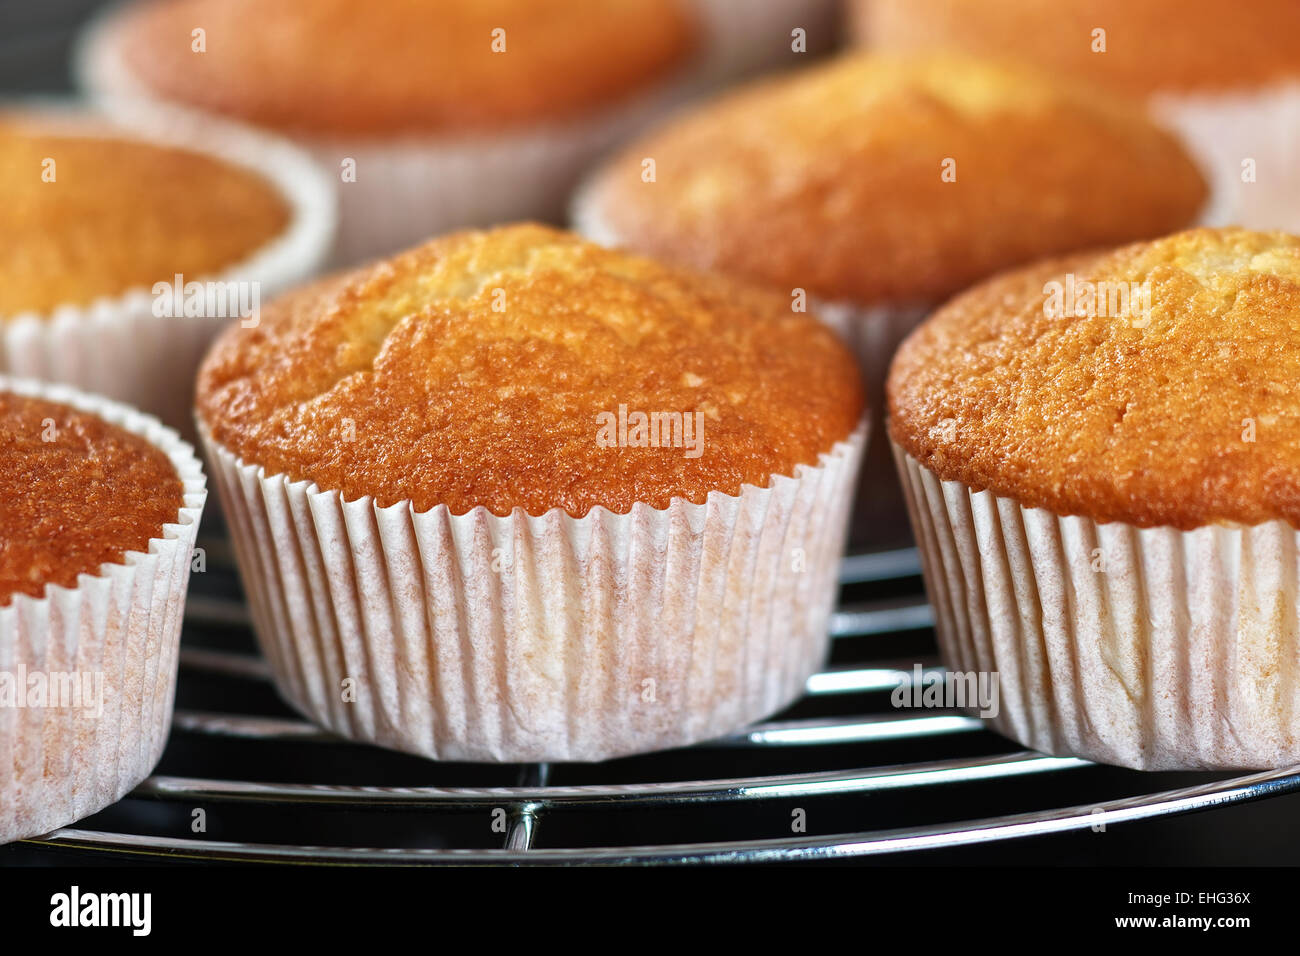 muffins on a baking rust Stock Photo